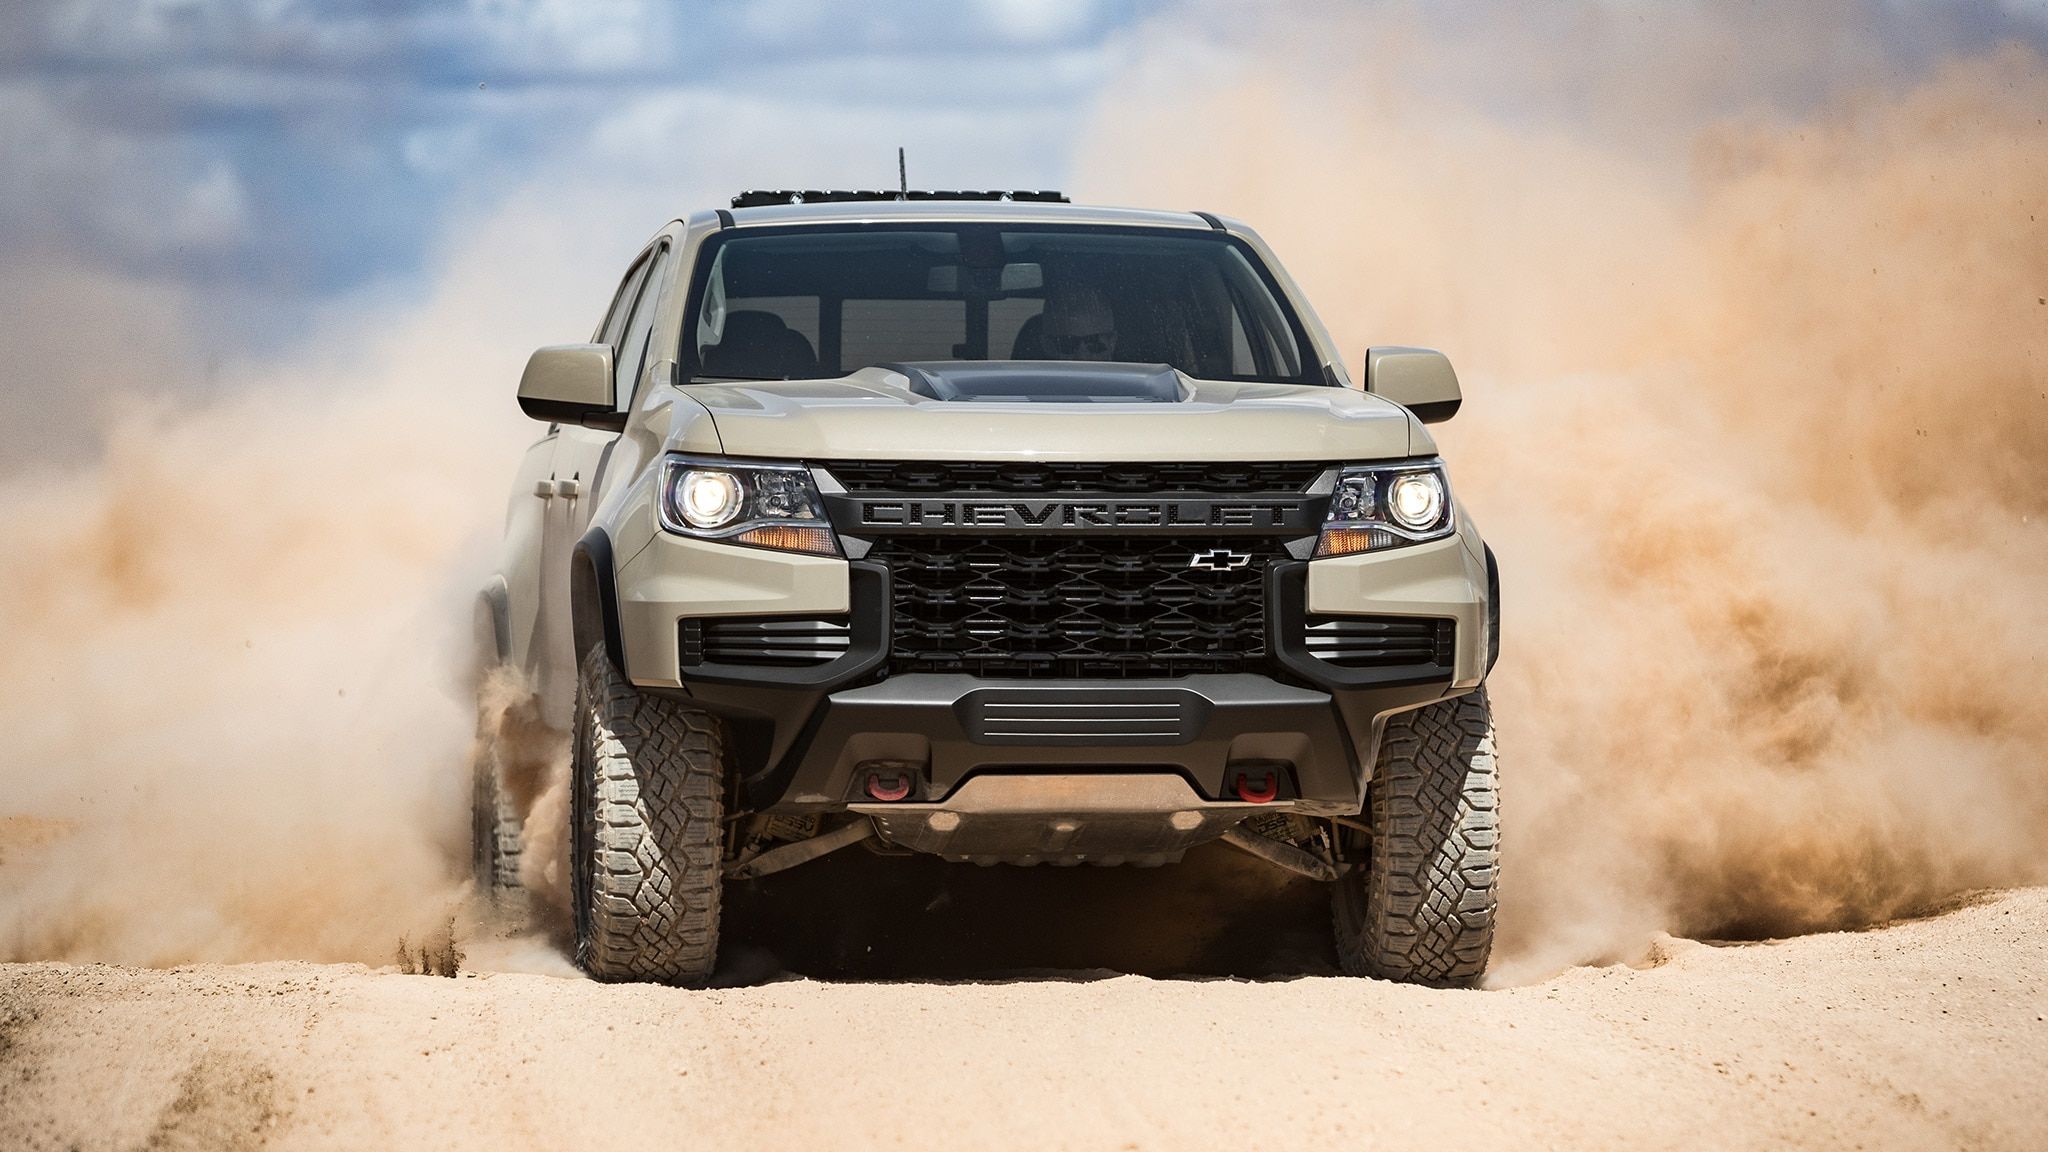 Chevy Colorado Updated To Look Grille Ier